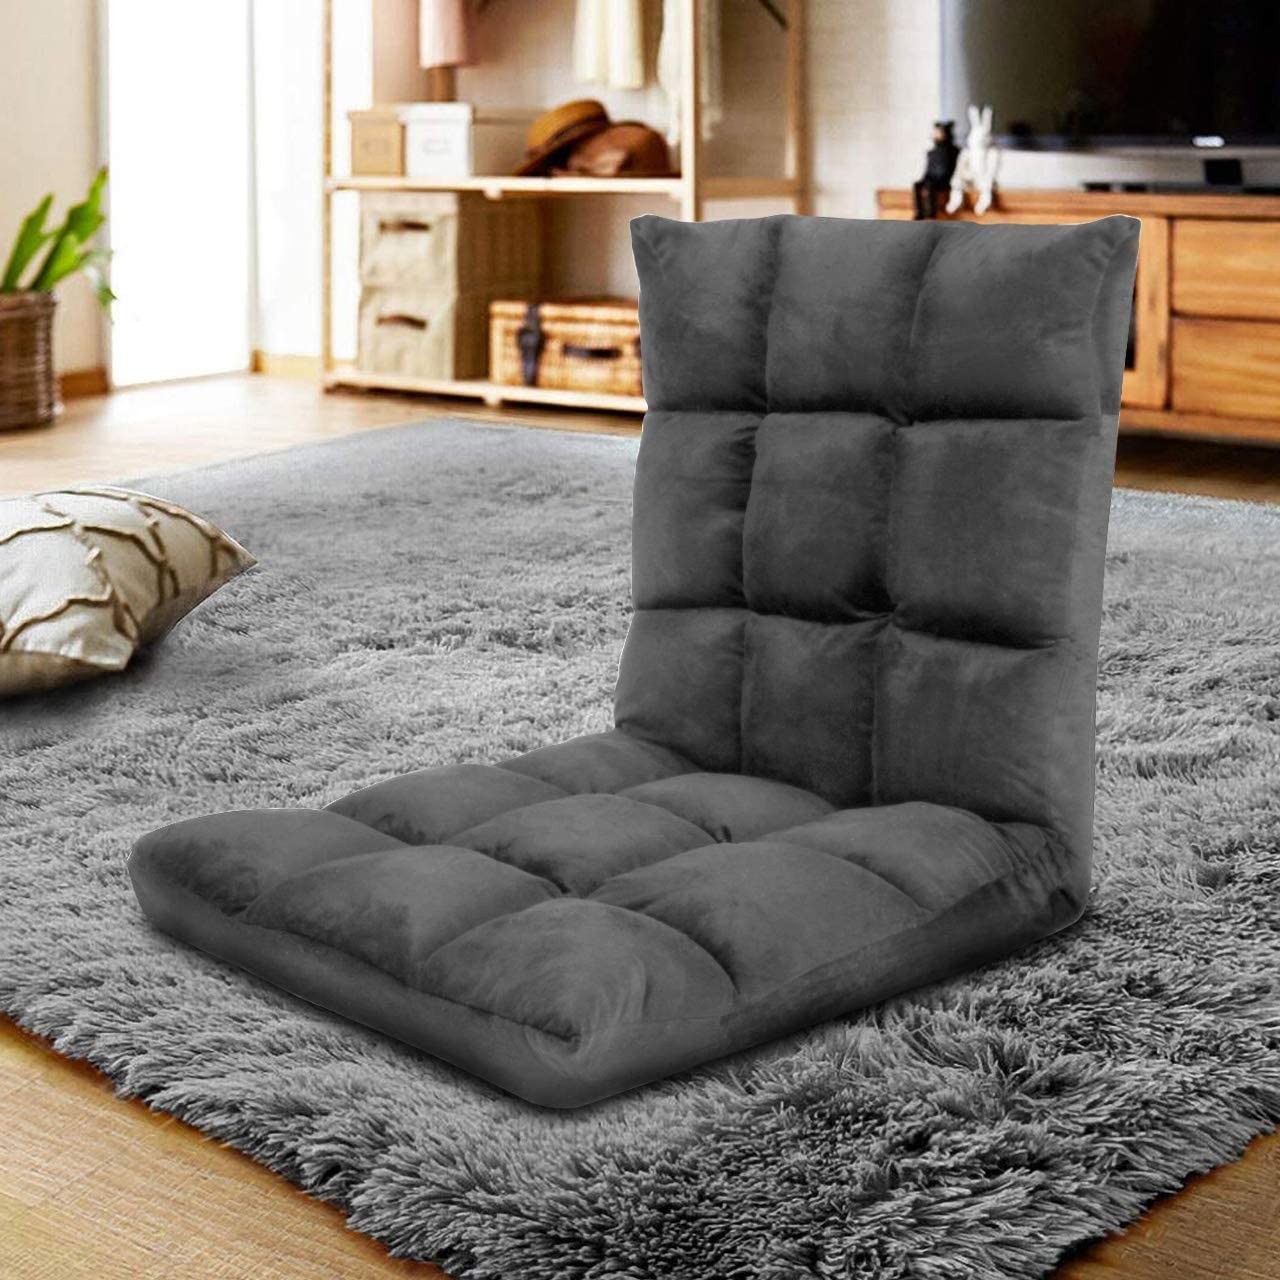 Adjustable Gaming Floor Sofa, Chair for Adults & Kids